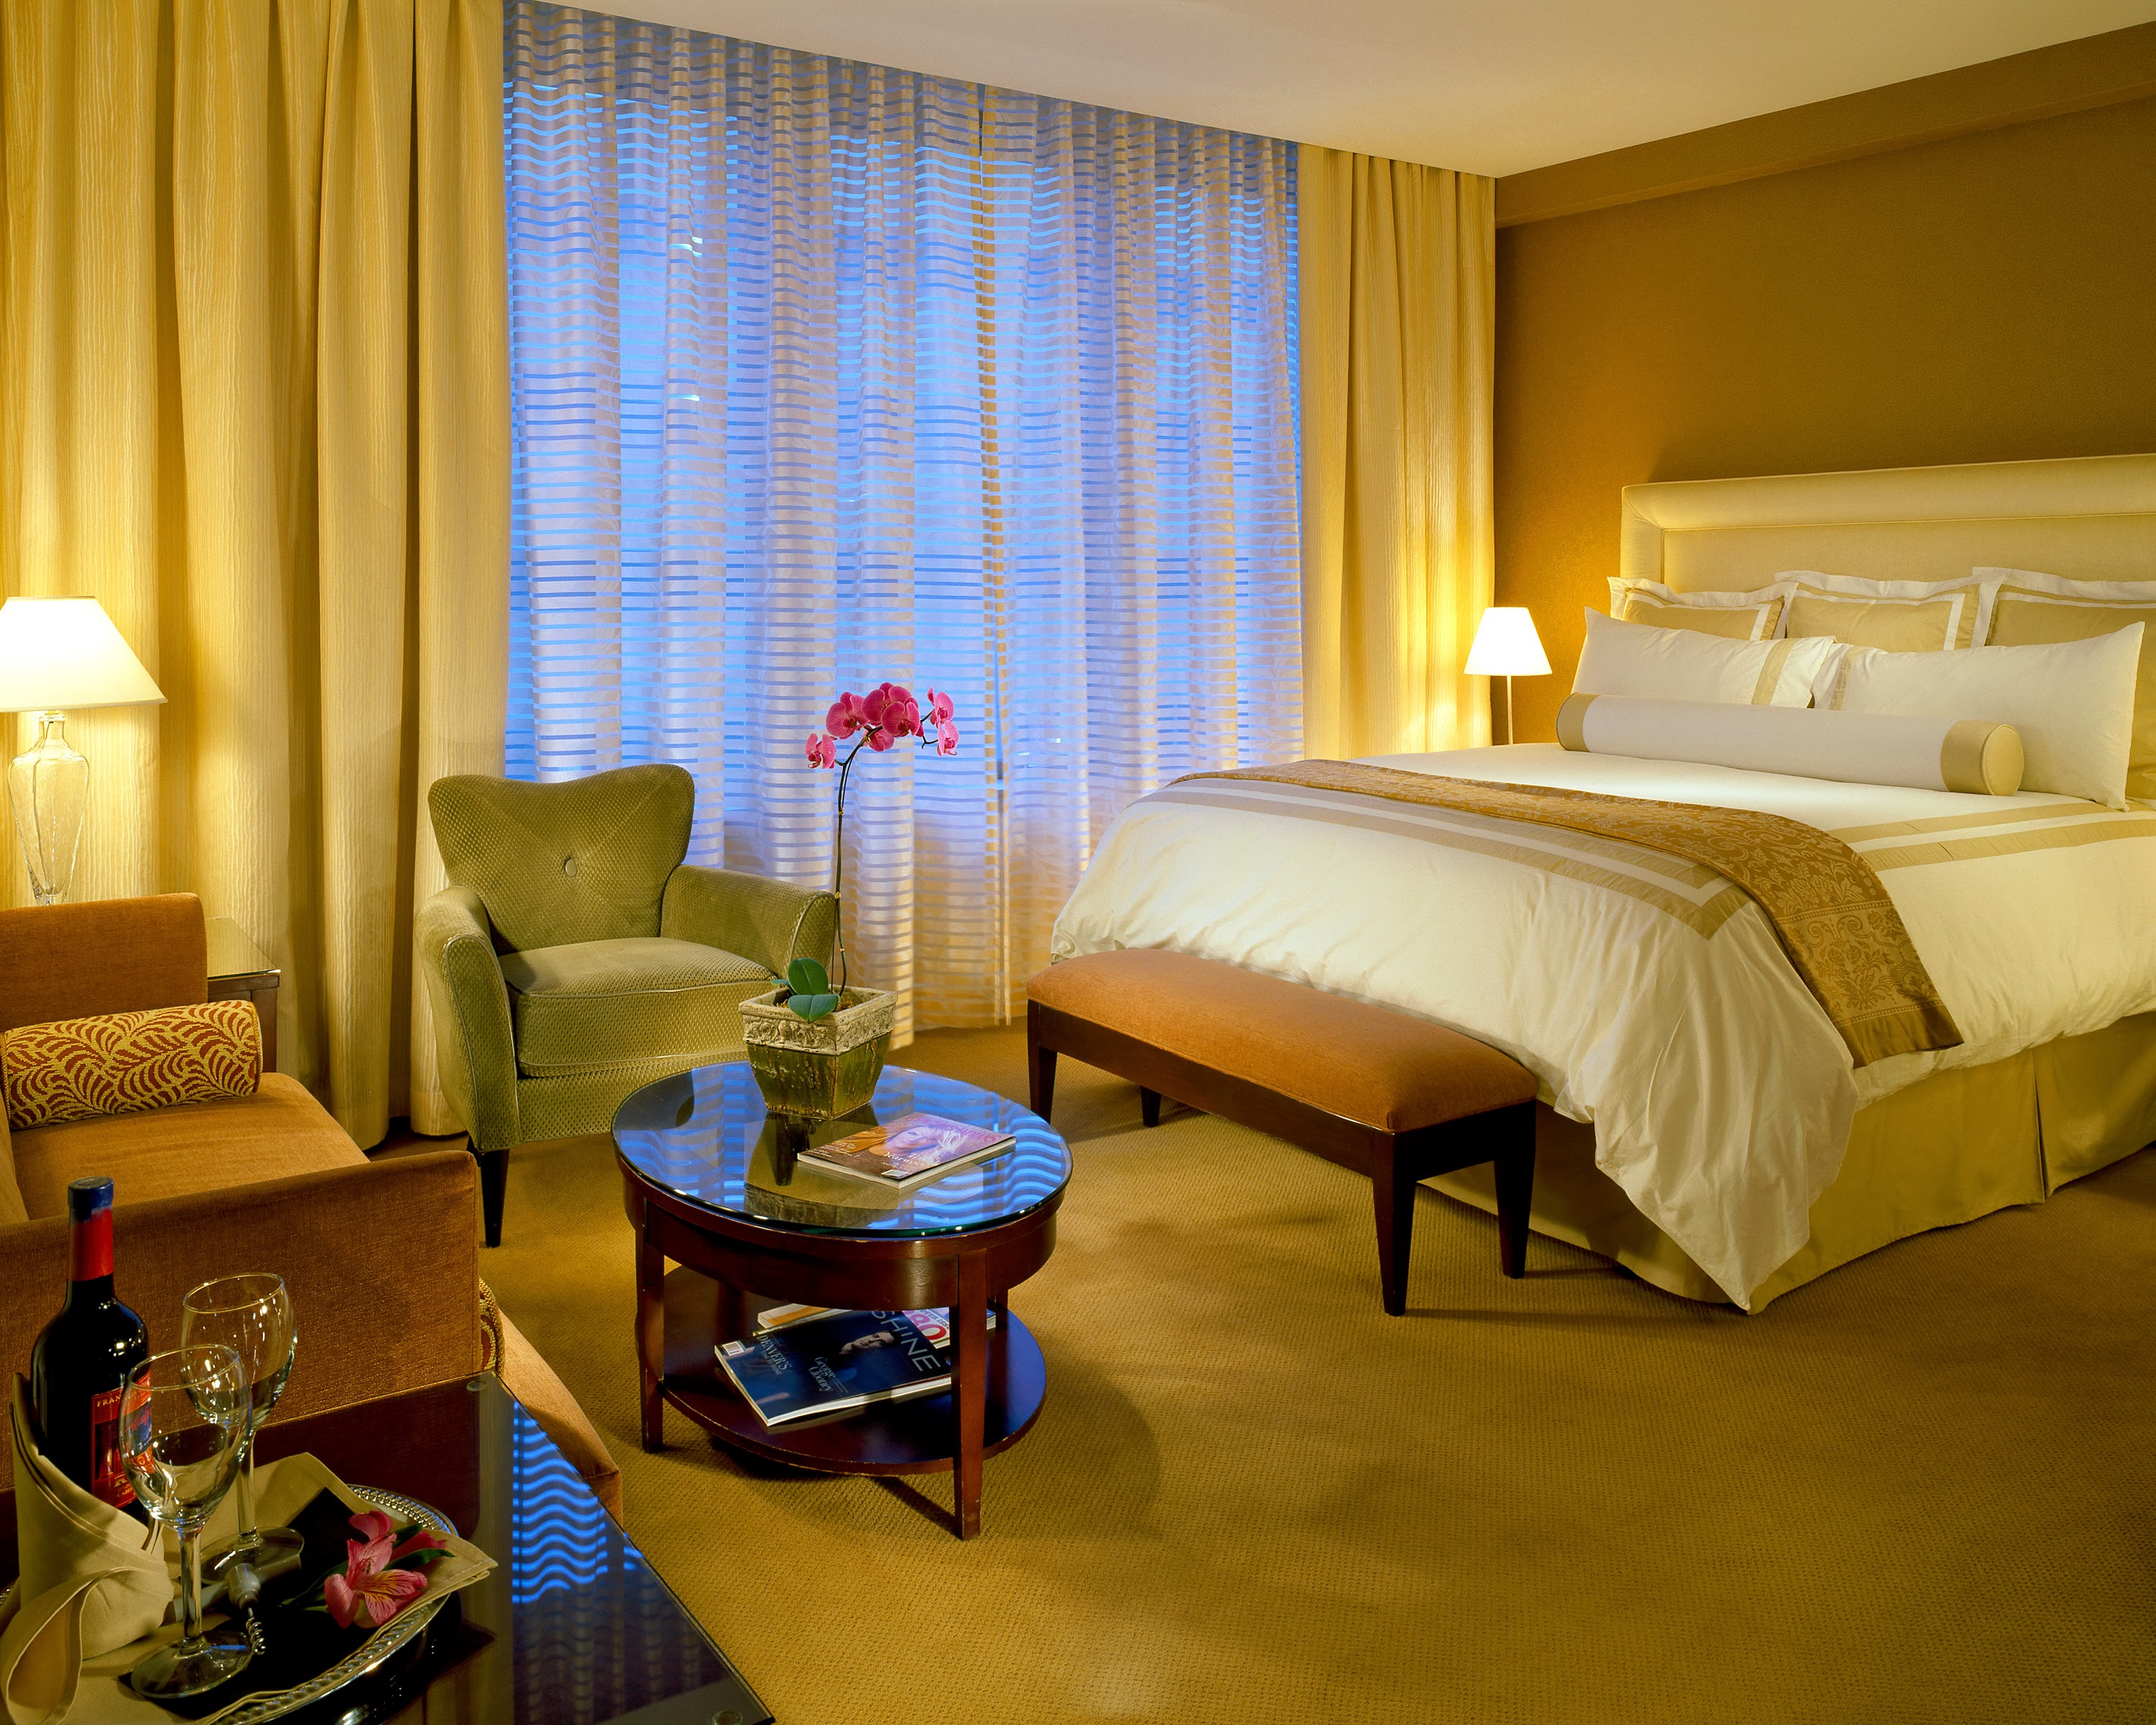 Hotel Teatro is a Four-Diamond, boutique Denver Hotel in beautiful Downtown Denver.